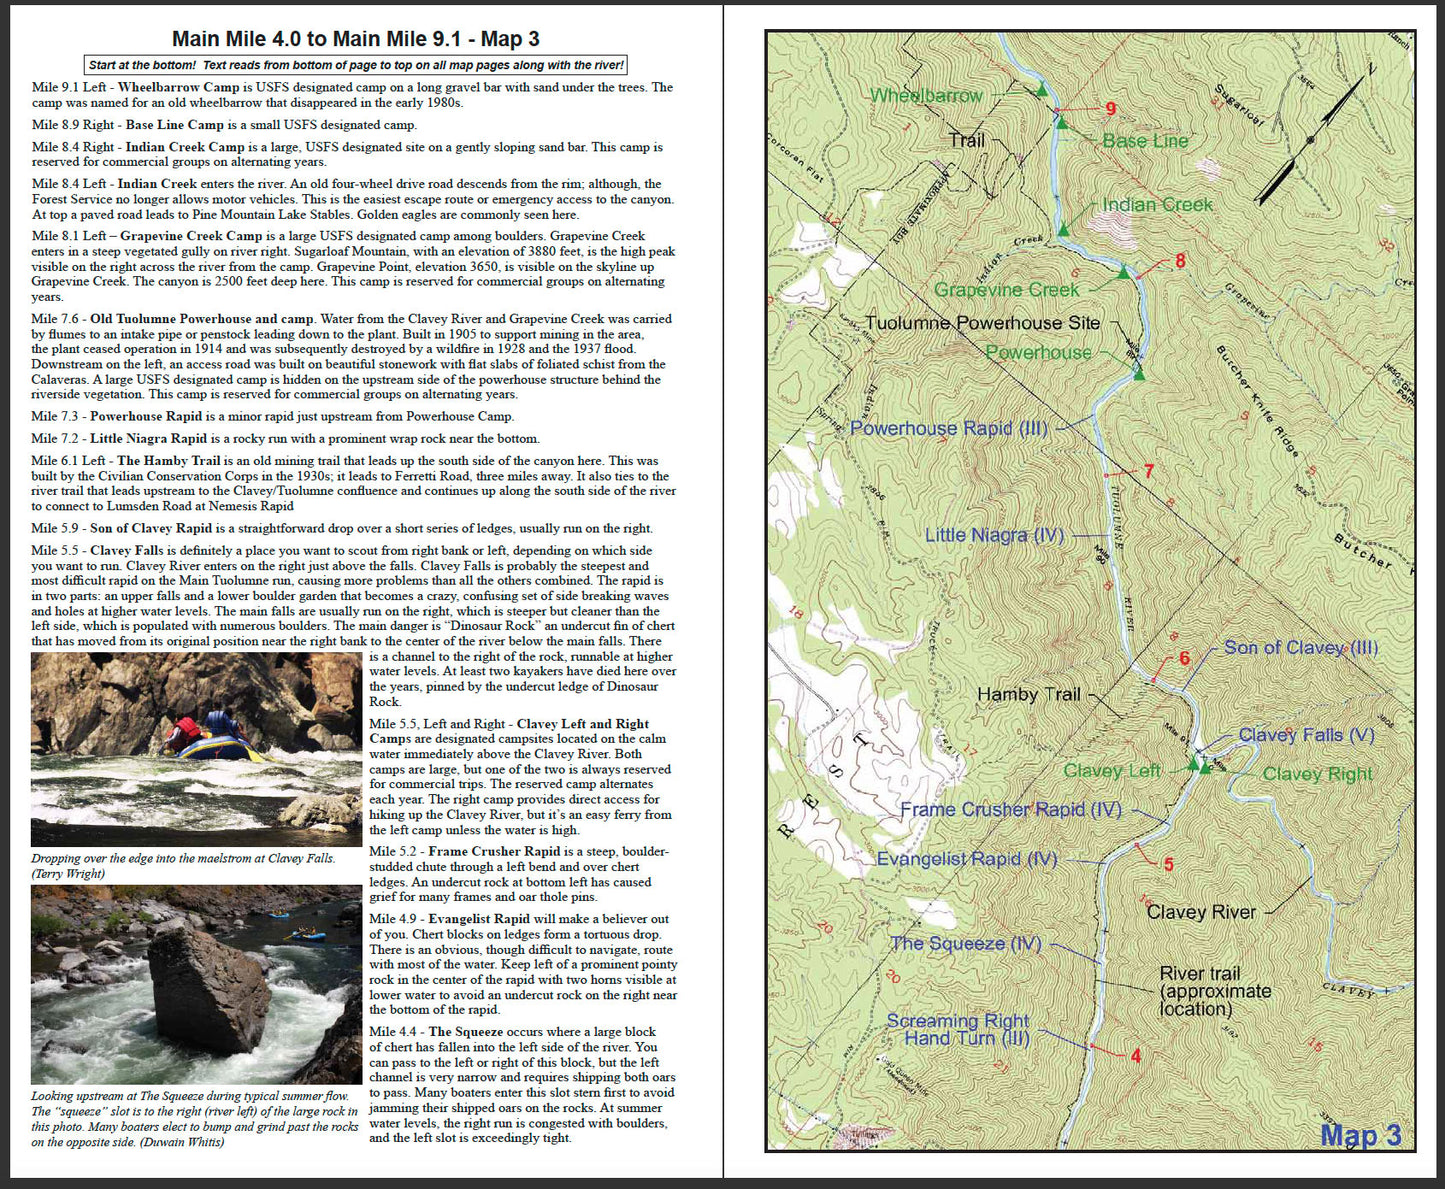 Waterproof and tear-resistant Rivermaps guide books with mile-by-mile descriptions of the Guide to the Cherry Creek/Upper and Main Tuolumne River in California.